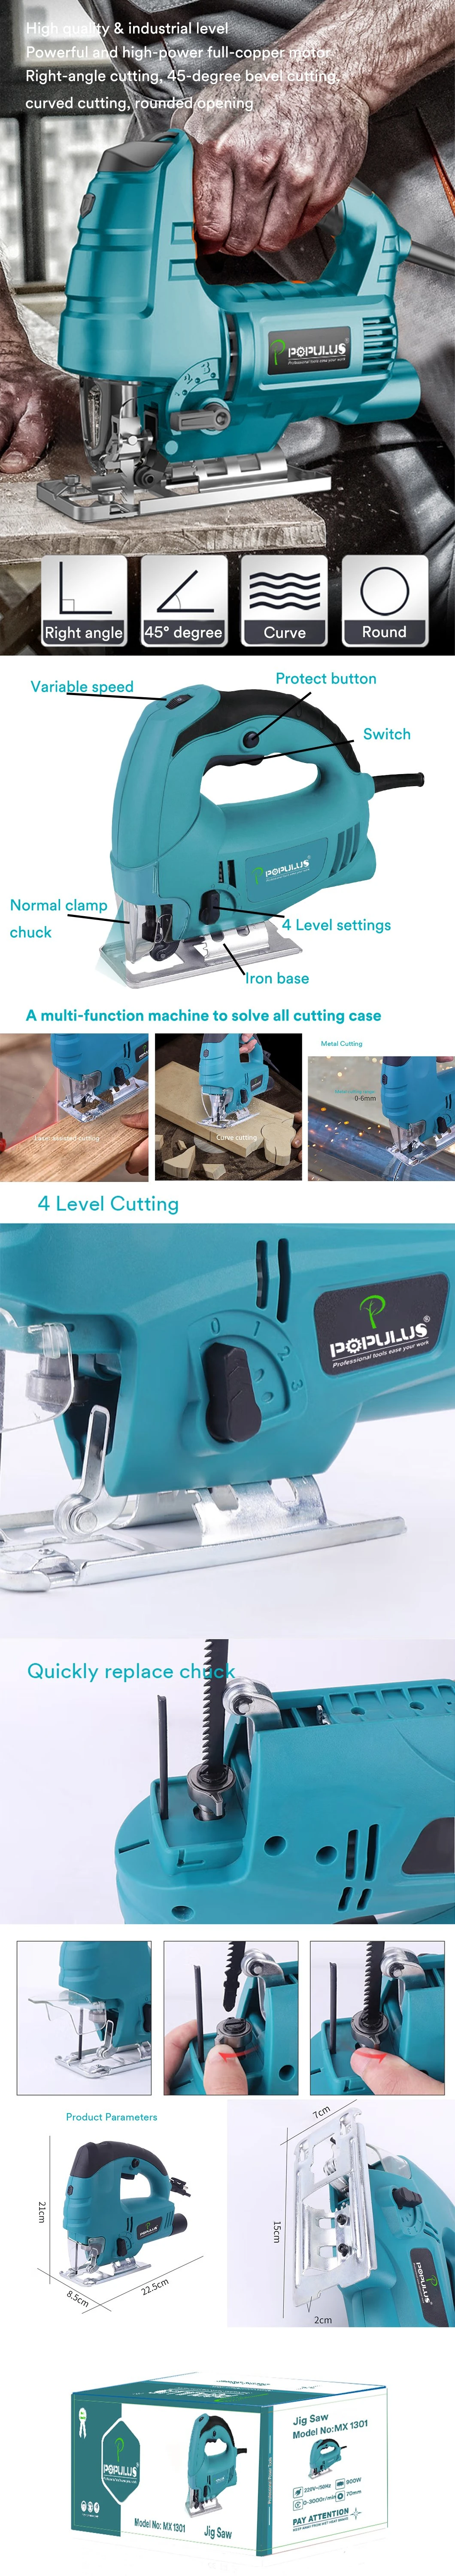 Populus New Arrival Industrial Quality Jig Saw Power Tools 900W/3000rpm